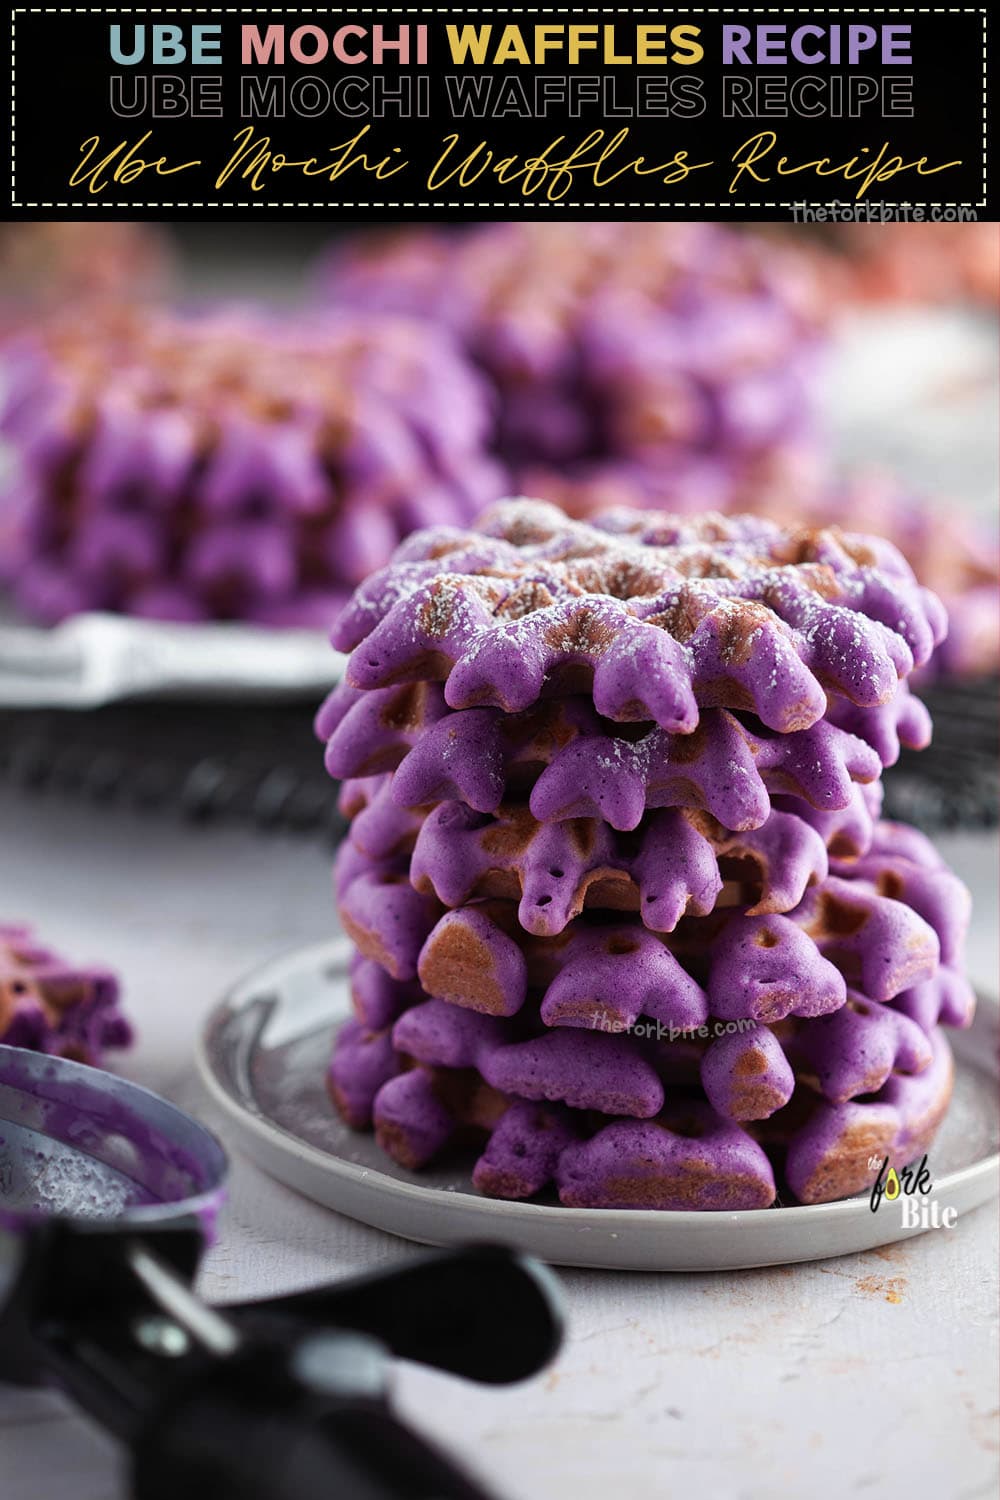 Ube mochi waffles combine unique taste elements with exceptionally chewy centers to create a light, crispy, and amazing flavor combination perfectly suited for any palate.